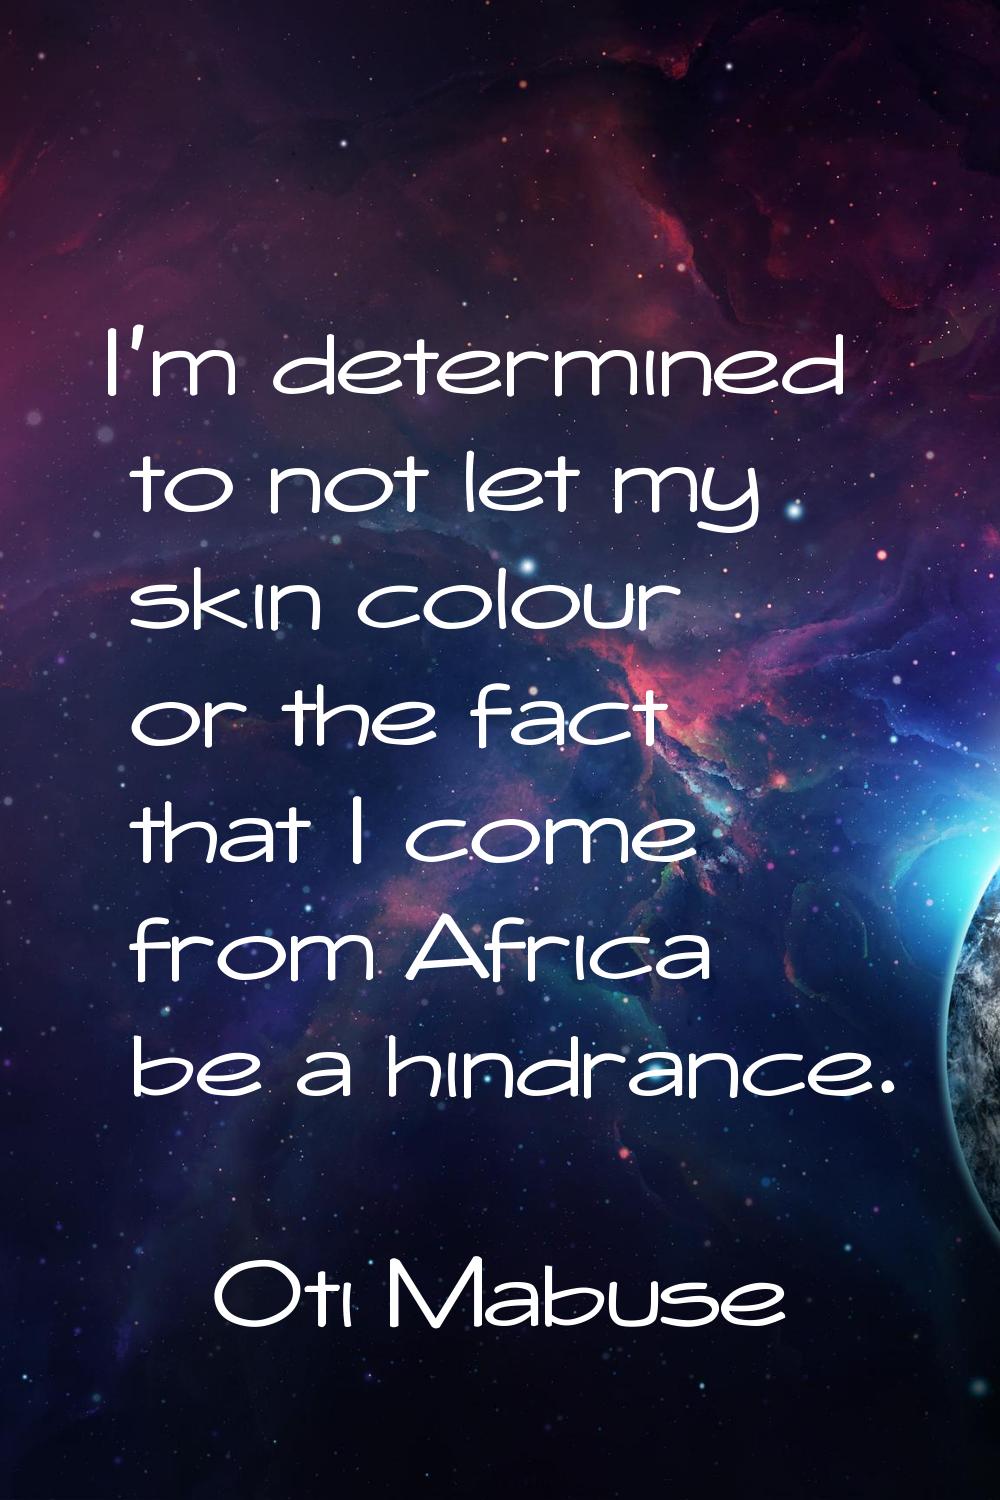 I’m determined to not let my skin colour or the fact that I come from Africa be a hindrance.